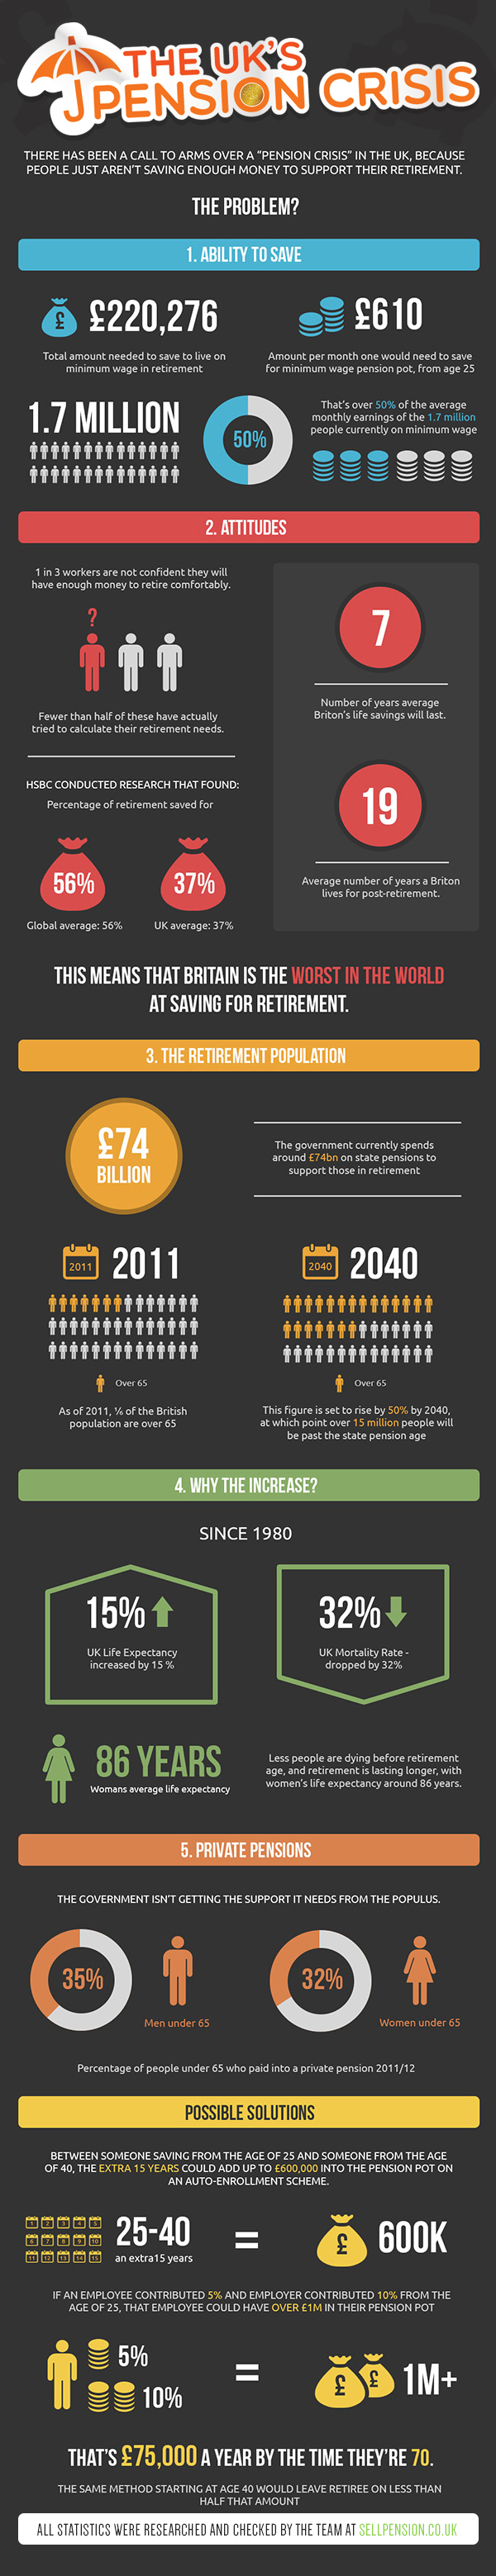 The UK's Pension Crisis]